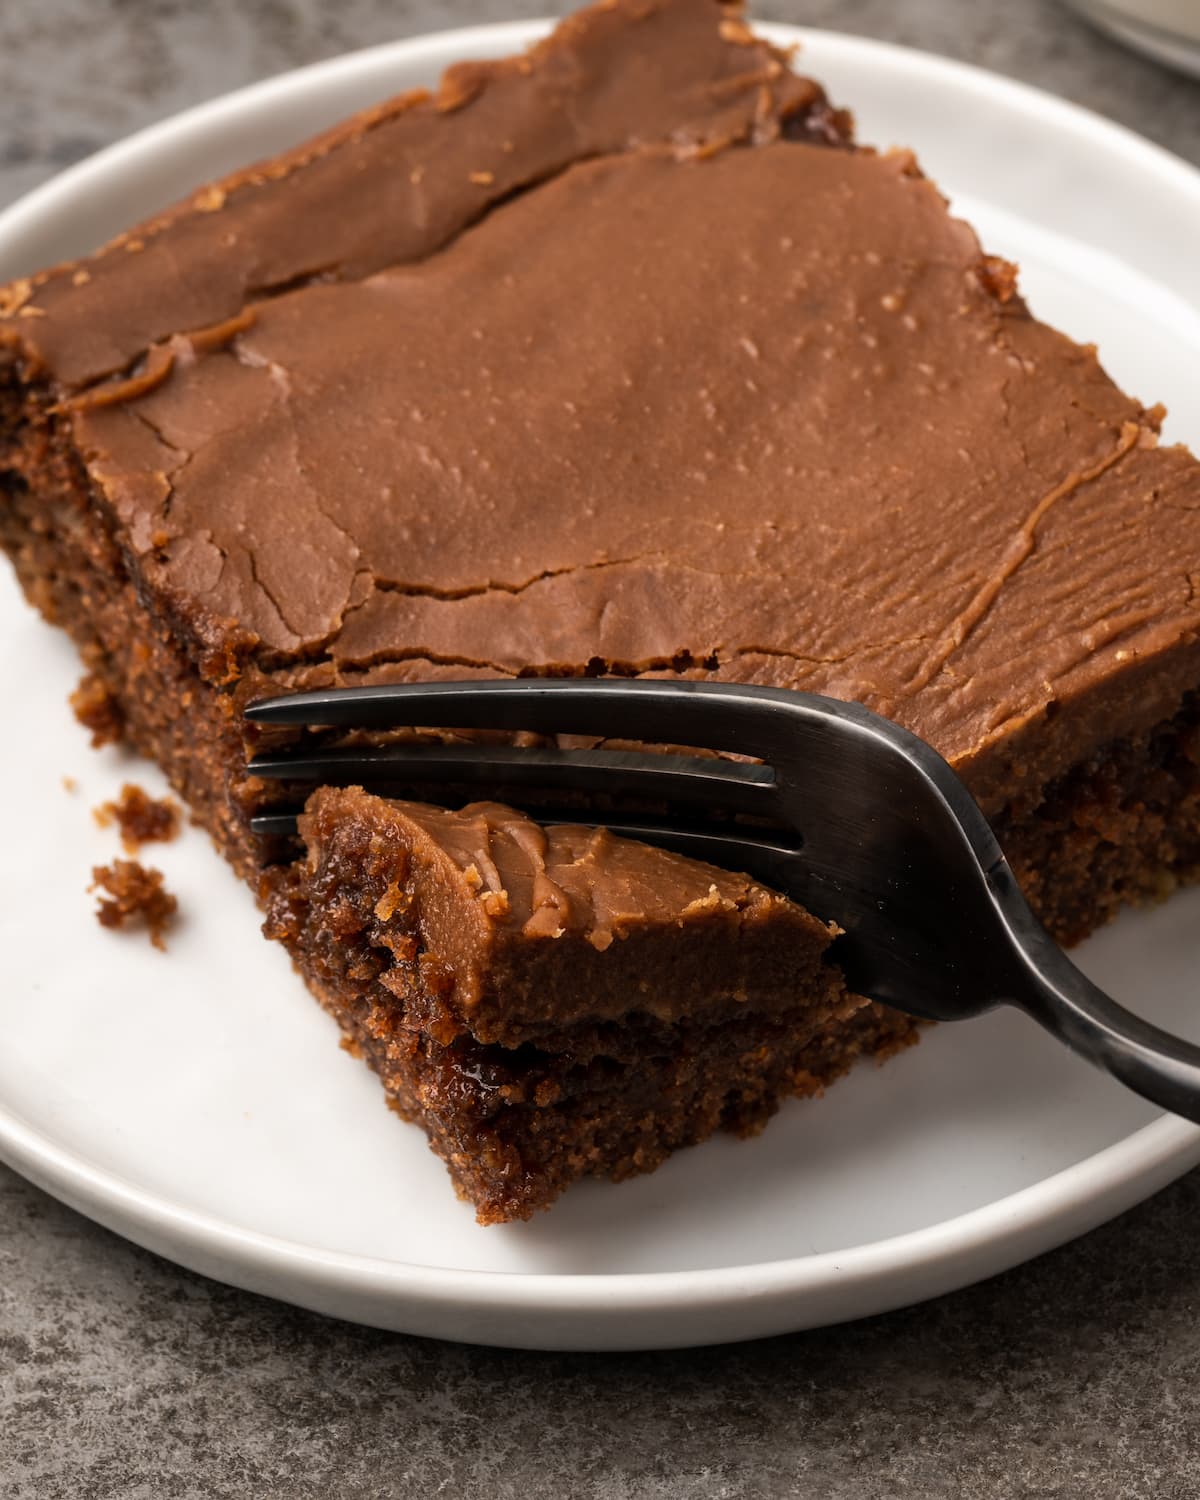 A fork cuts into a slice of chocolate sheet cake on a white plate.